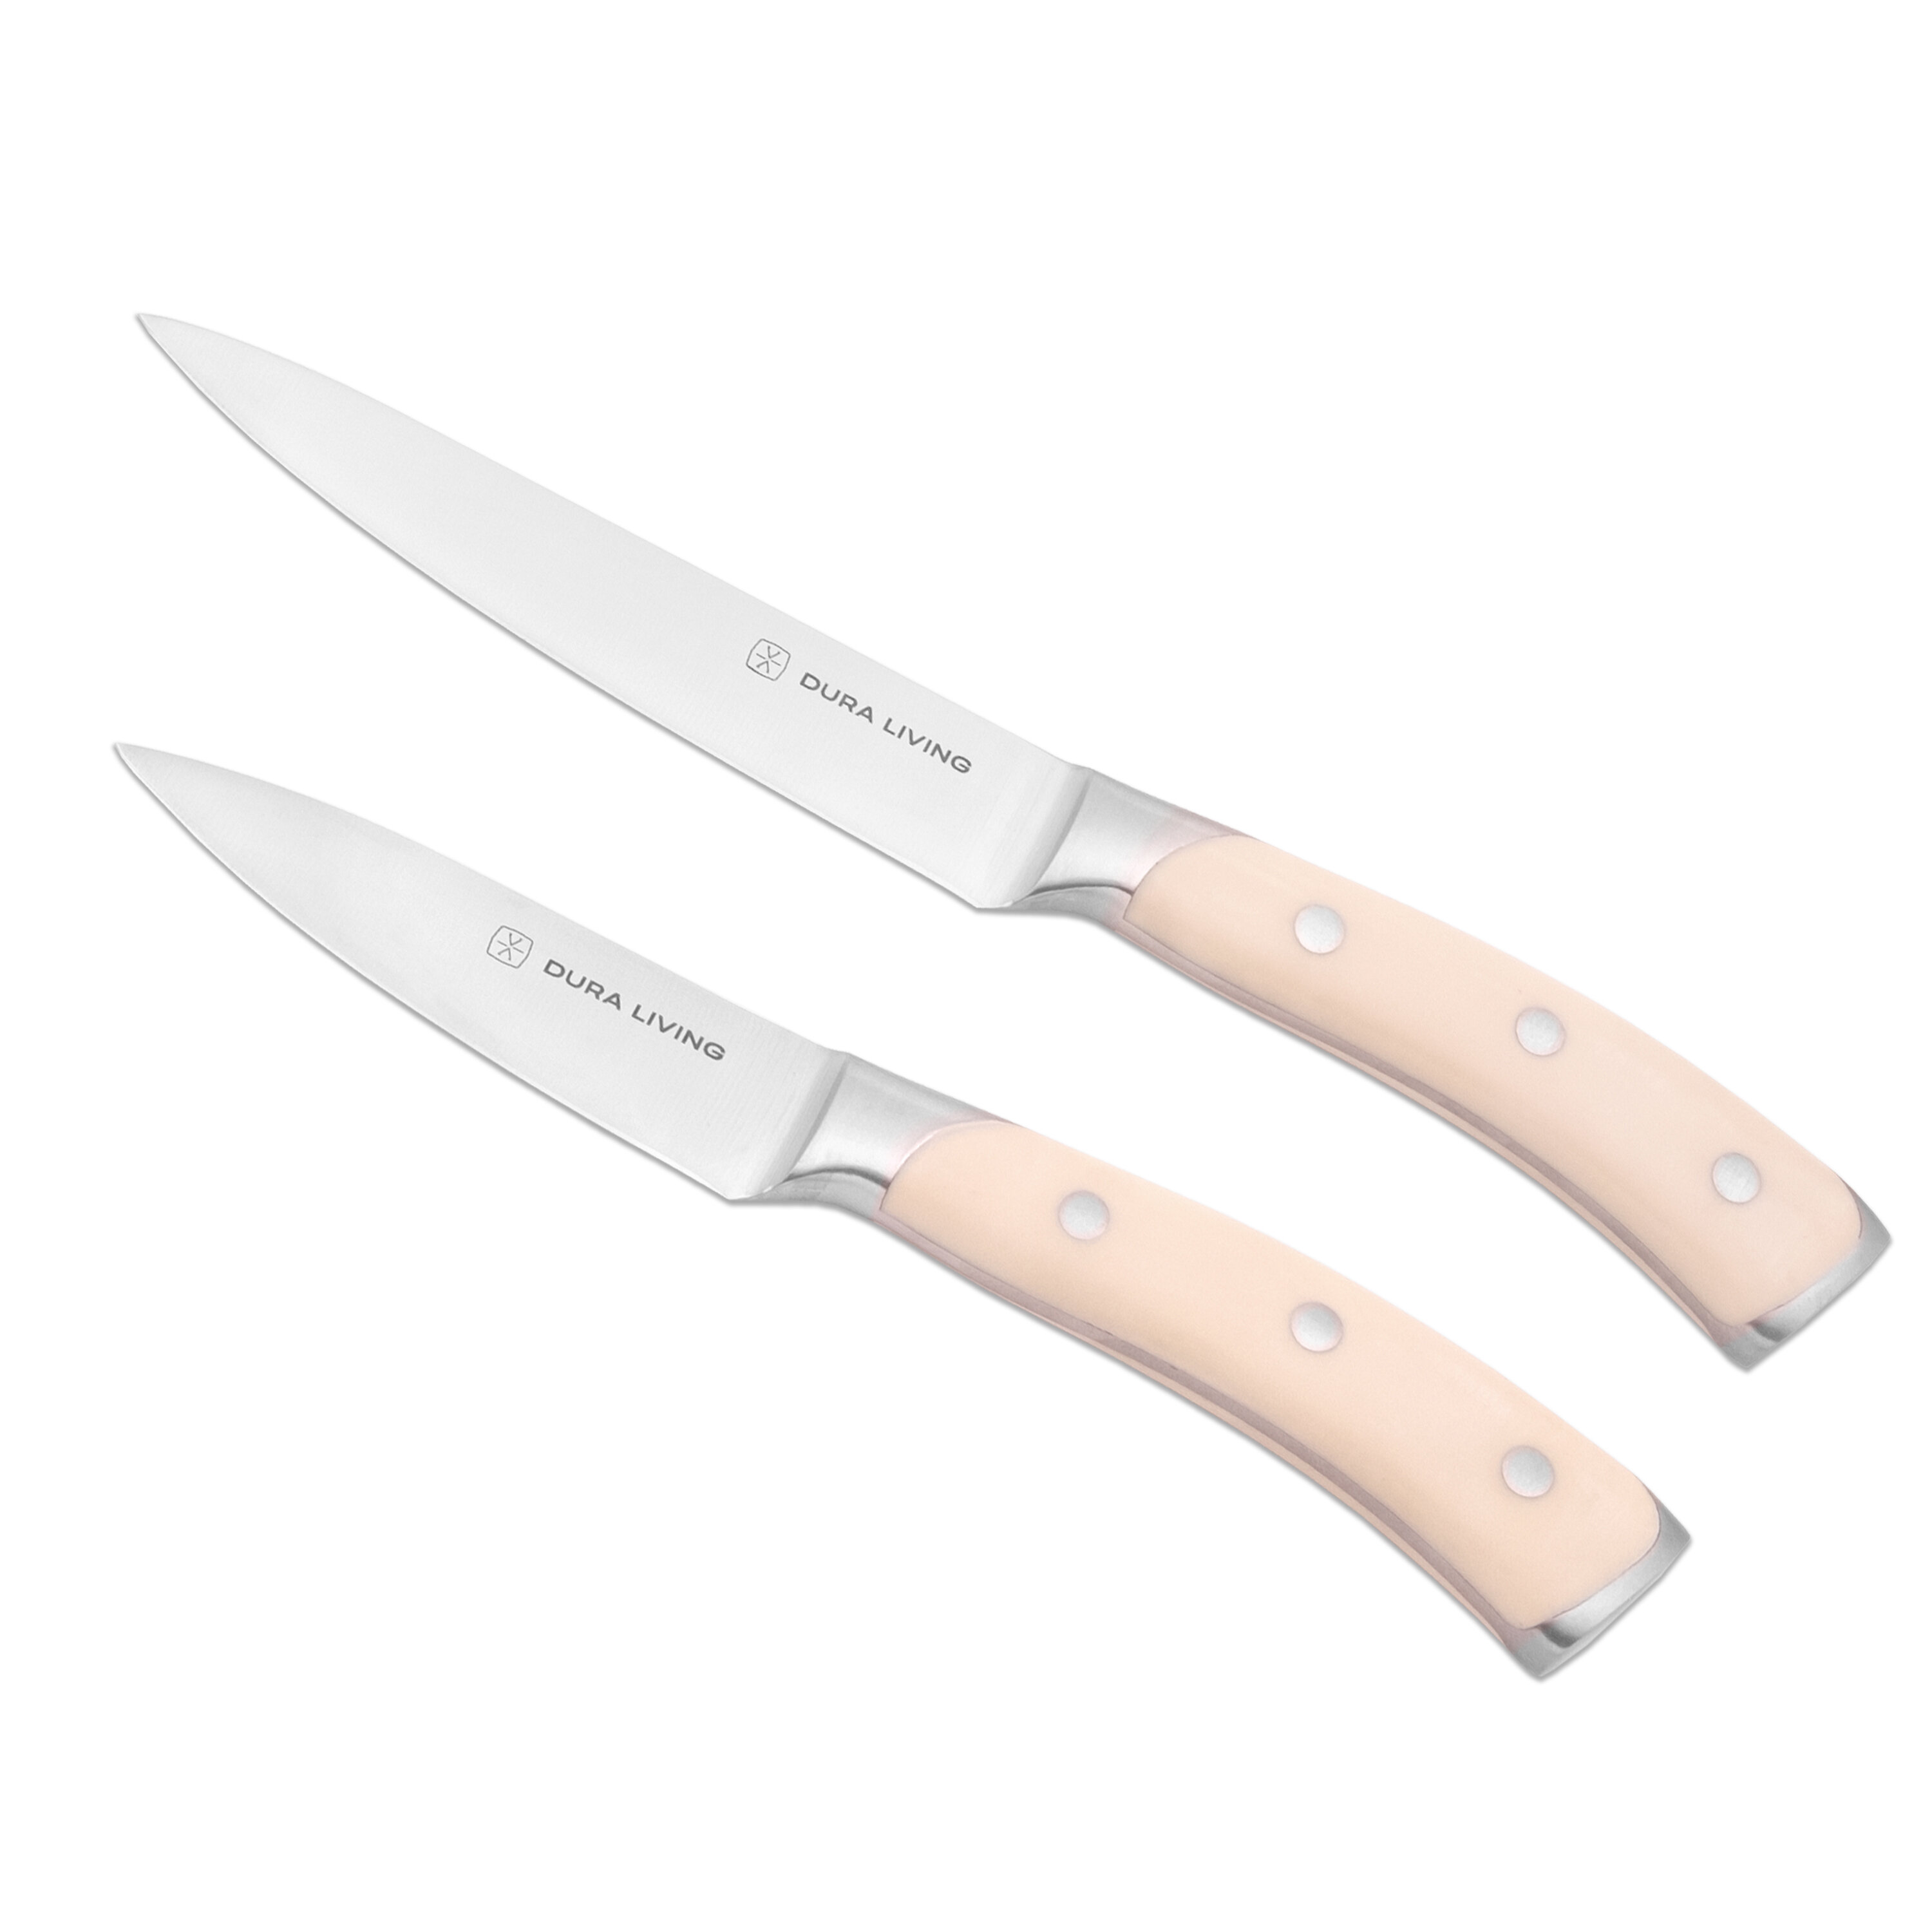 Dura Living 4-Piece Steak Knife Set - Forged High Carbon Stainless